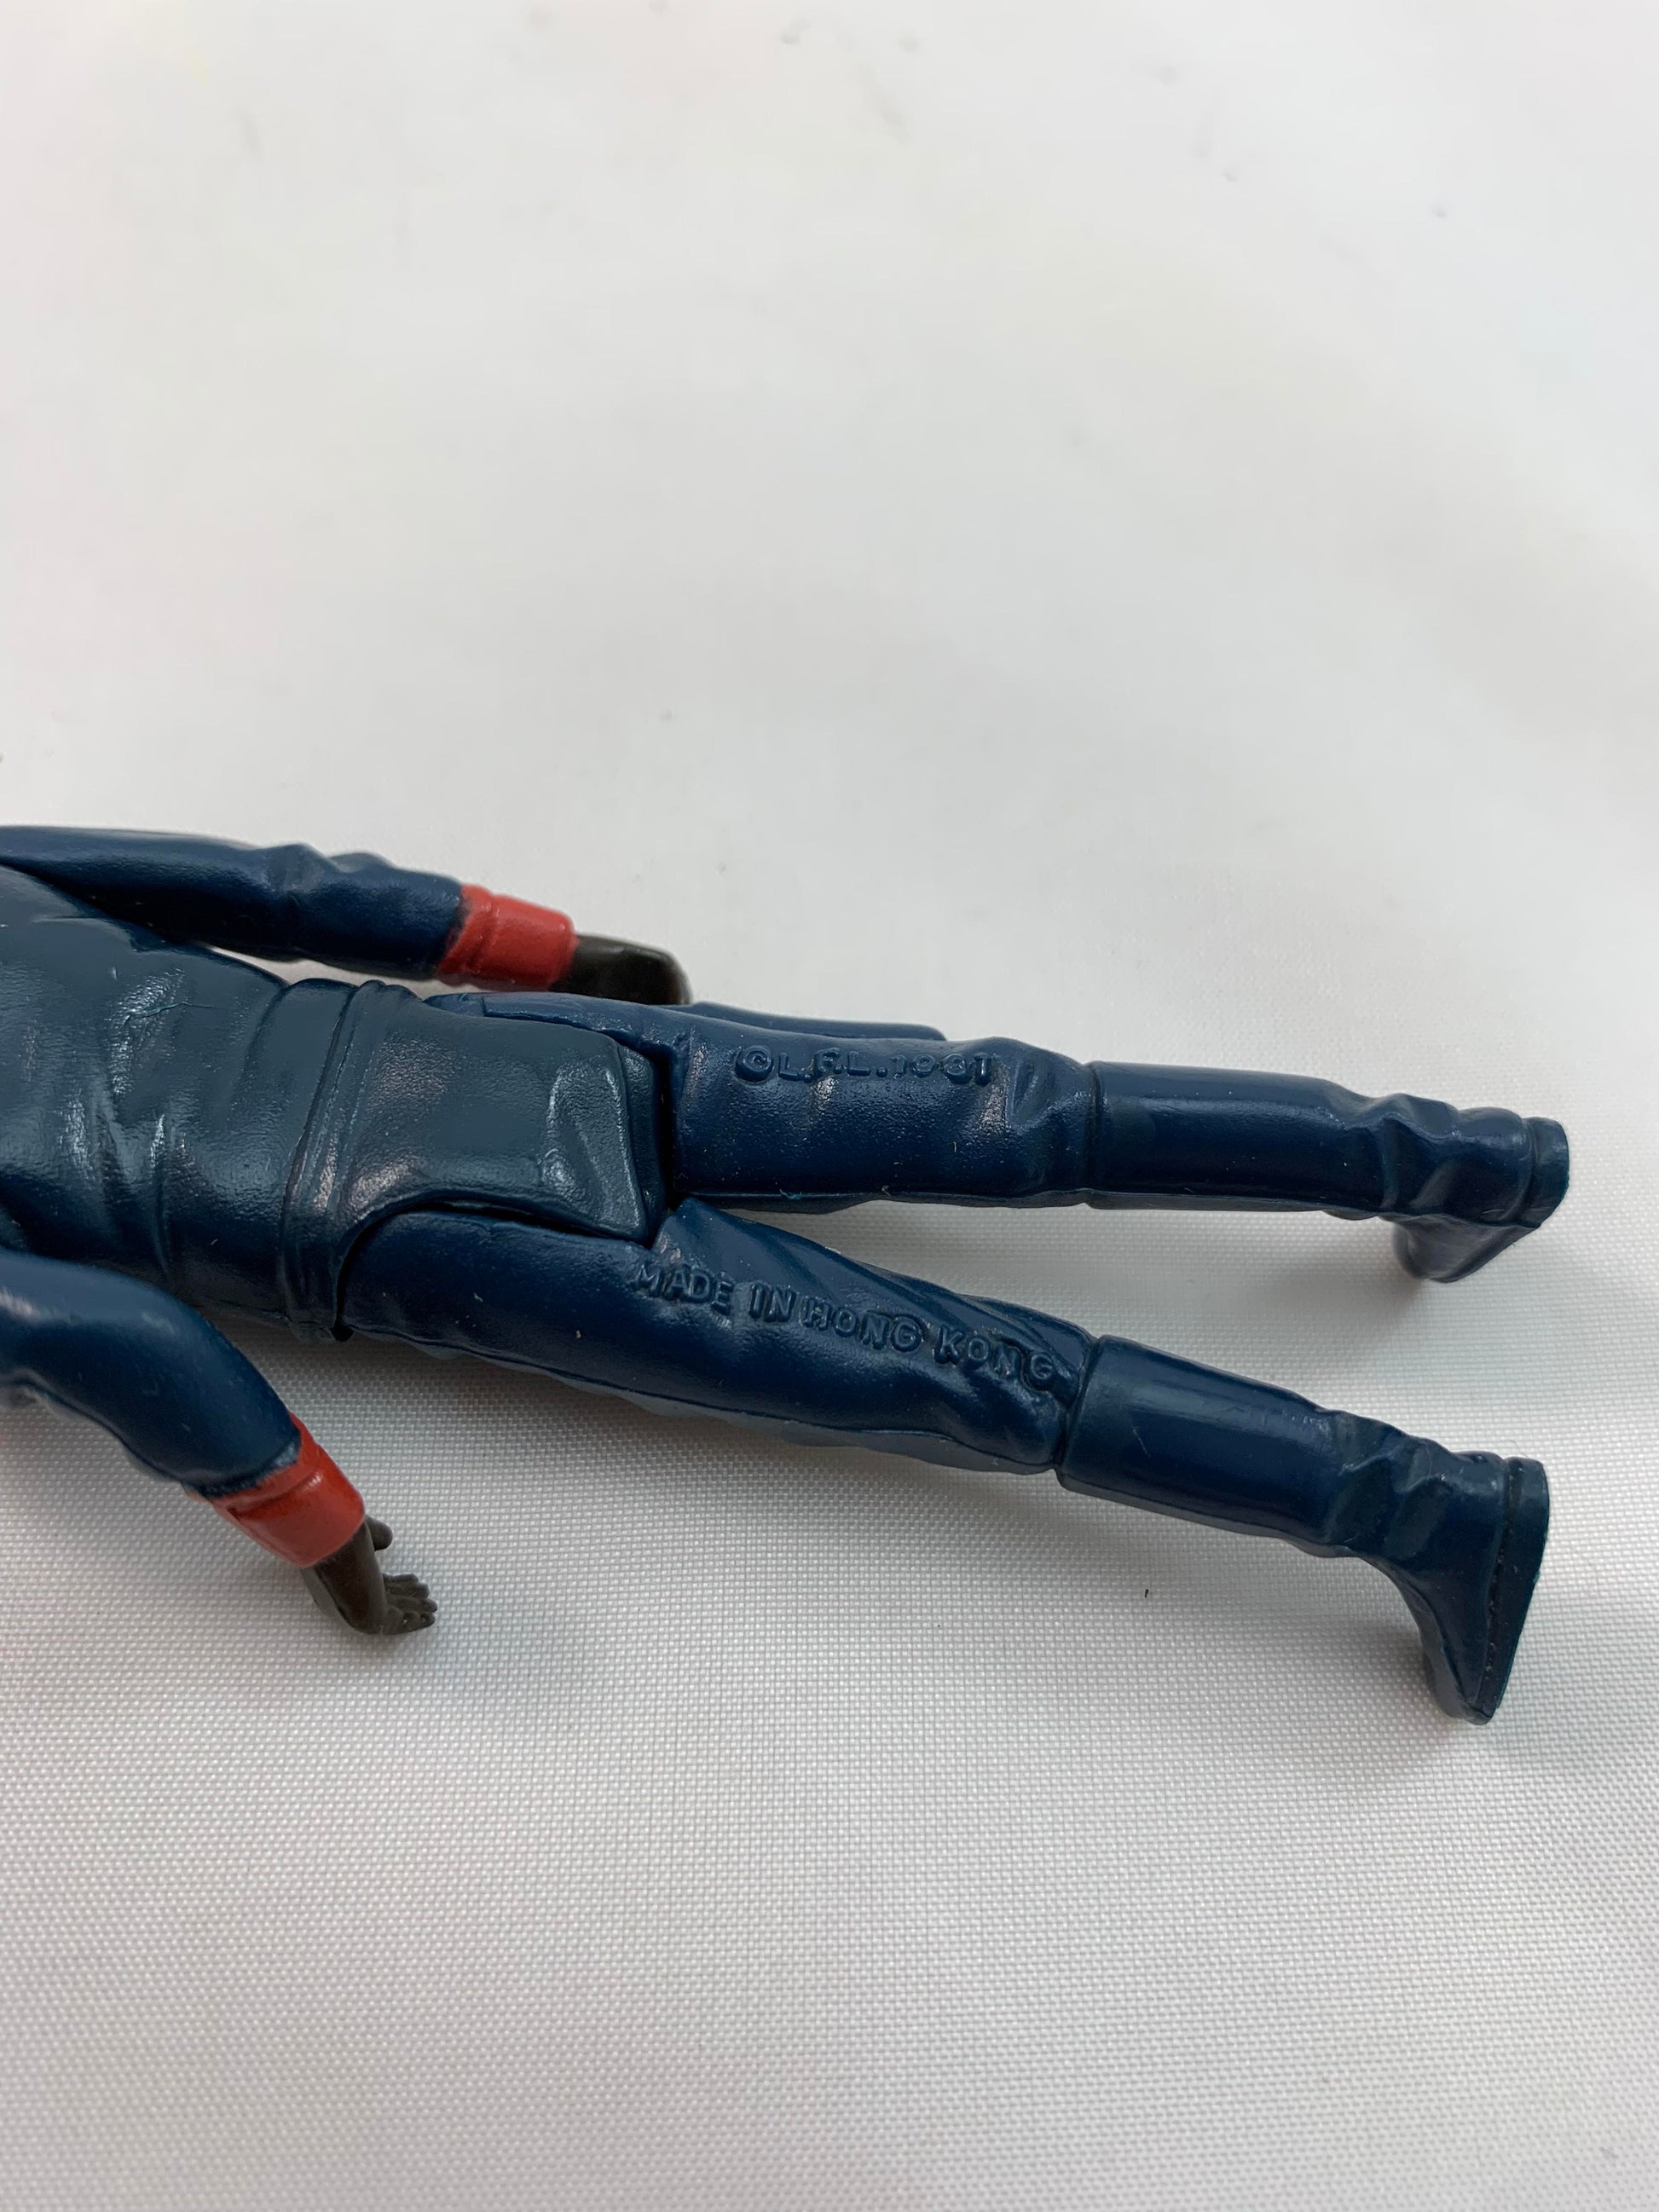 Kenner Vintage Star Wars TESB: The Empire Strikes Back Bespin Security Guard (Black) with Blaster Rifle COO 1981 LFL Hong Kong - Loose